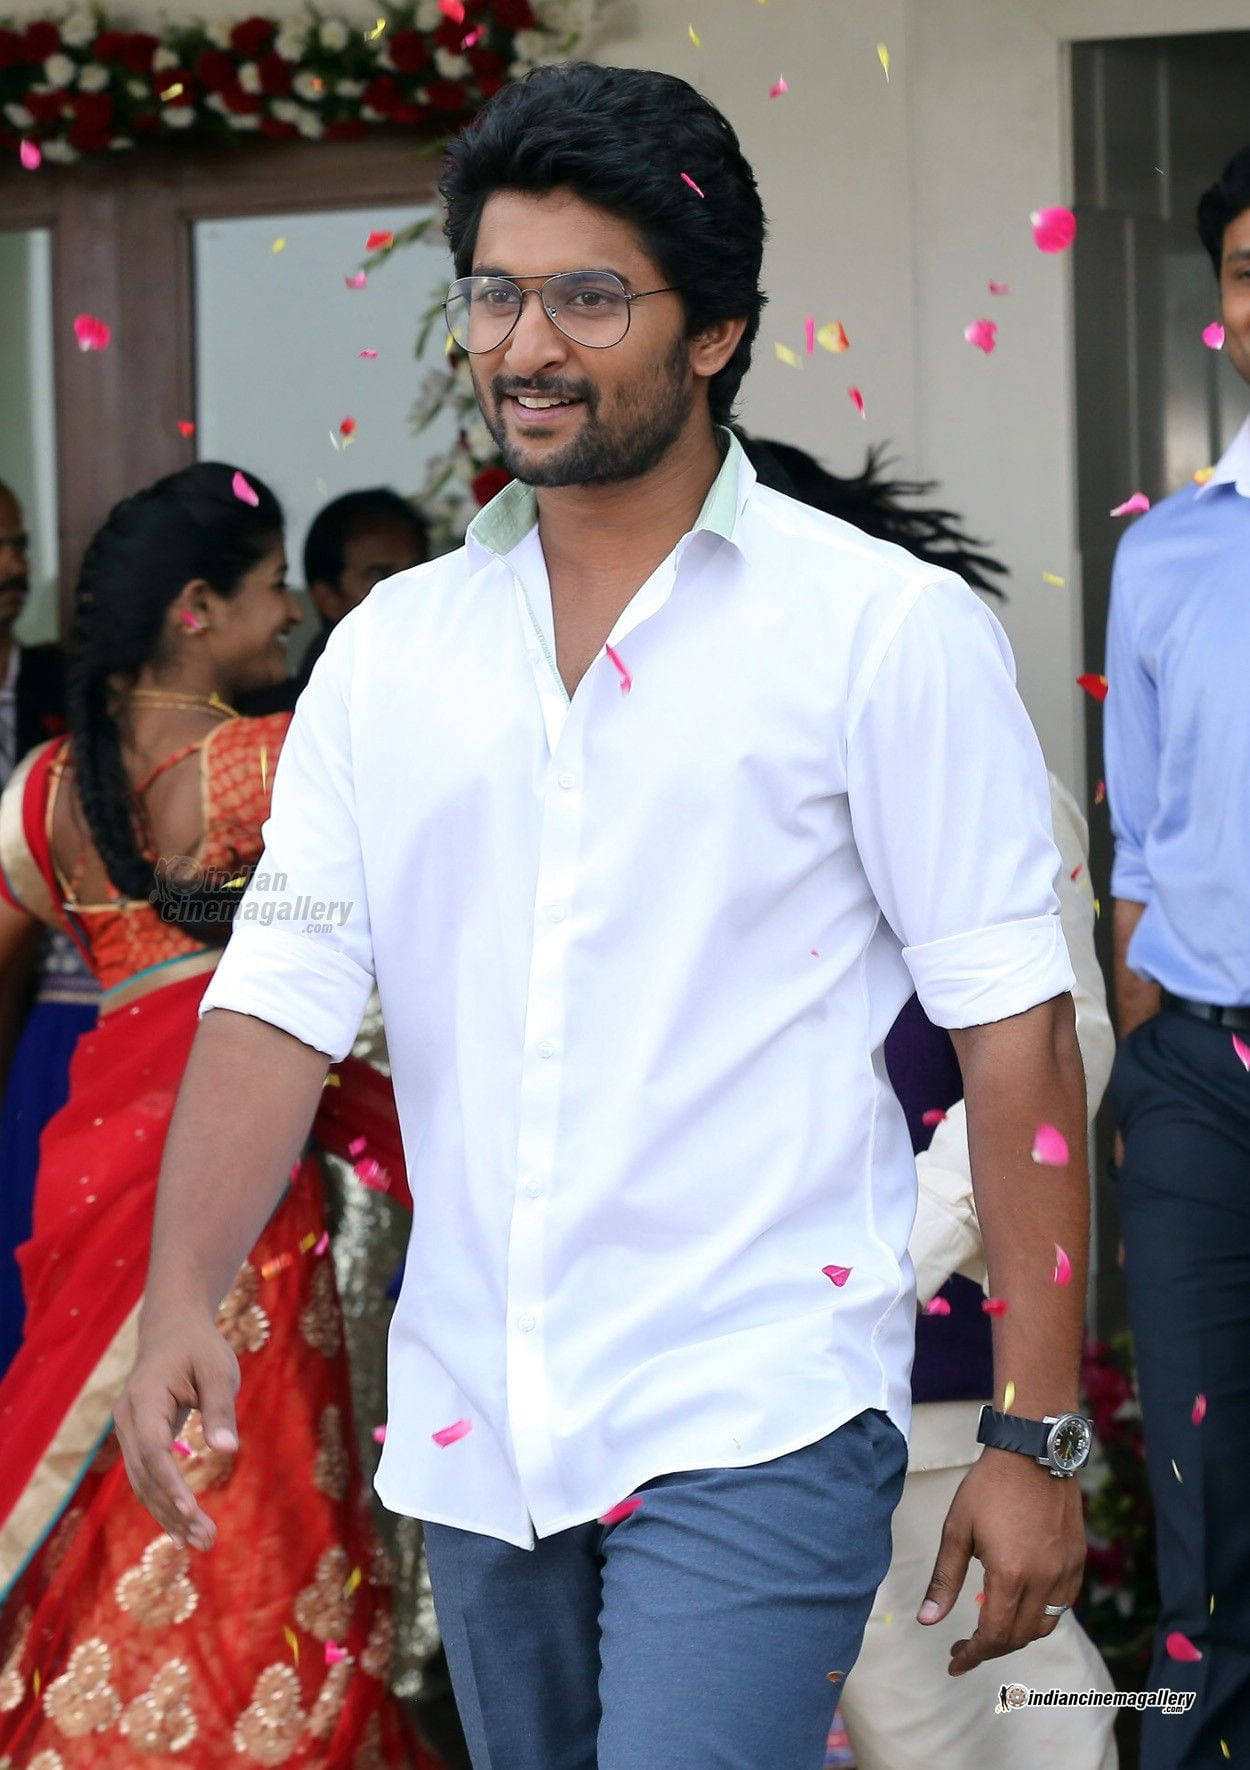 Dashing Look Of Actor Nani In Casual White Outfit Background